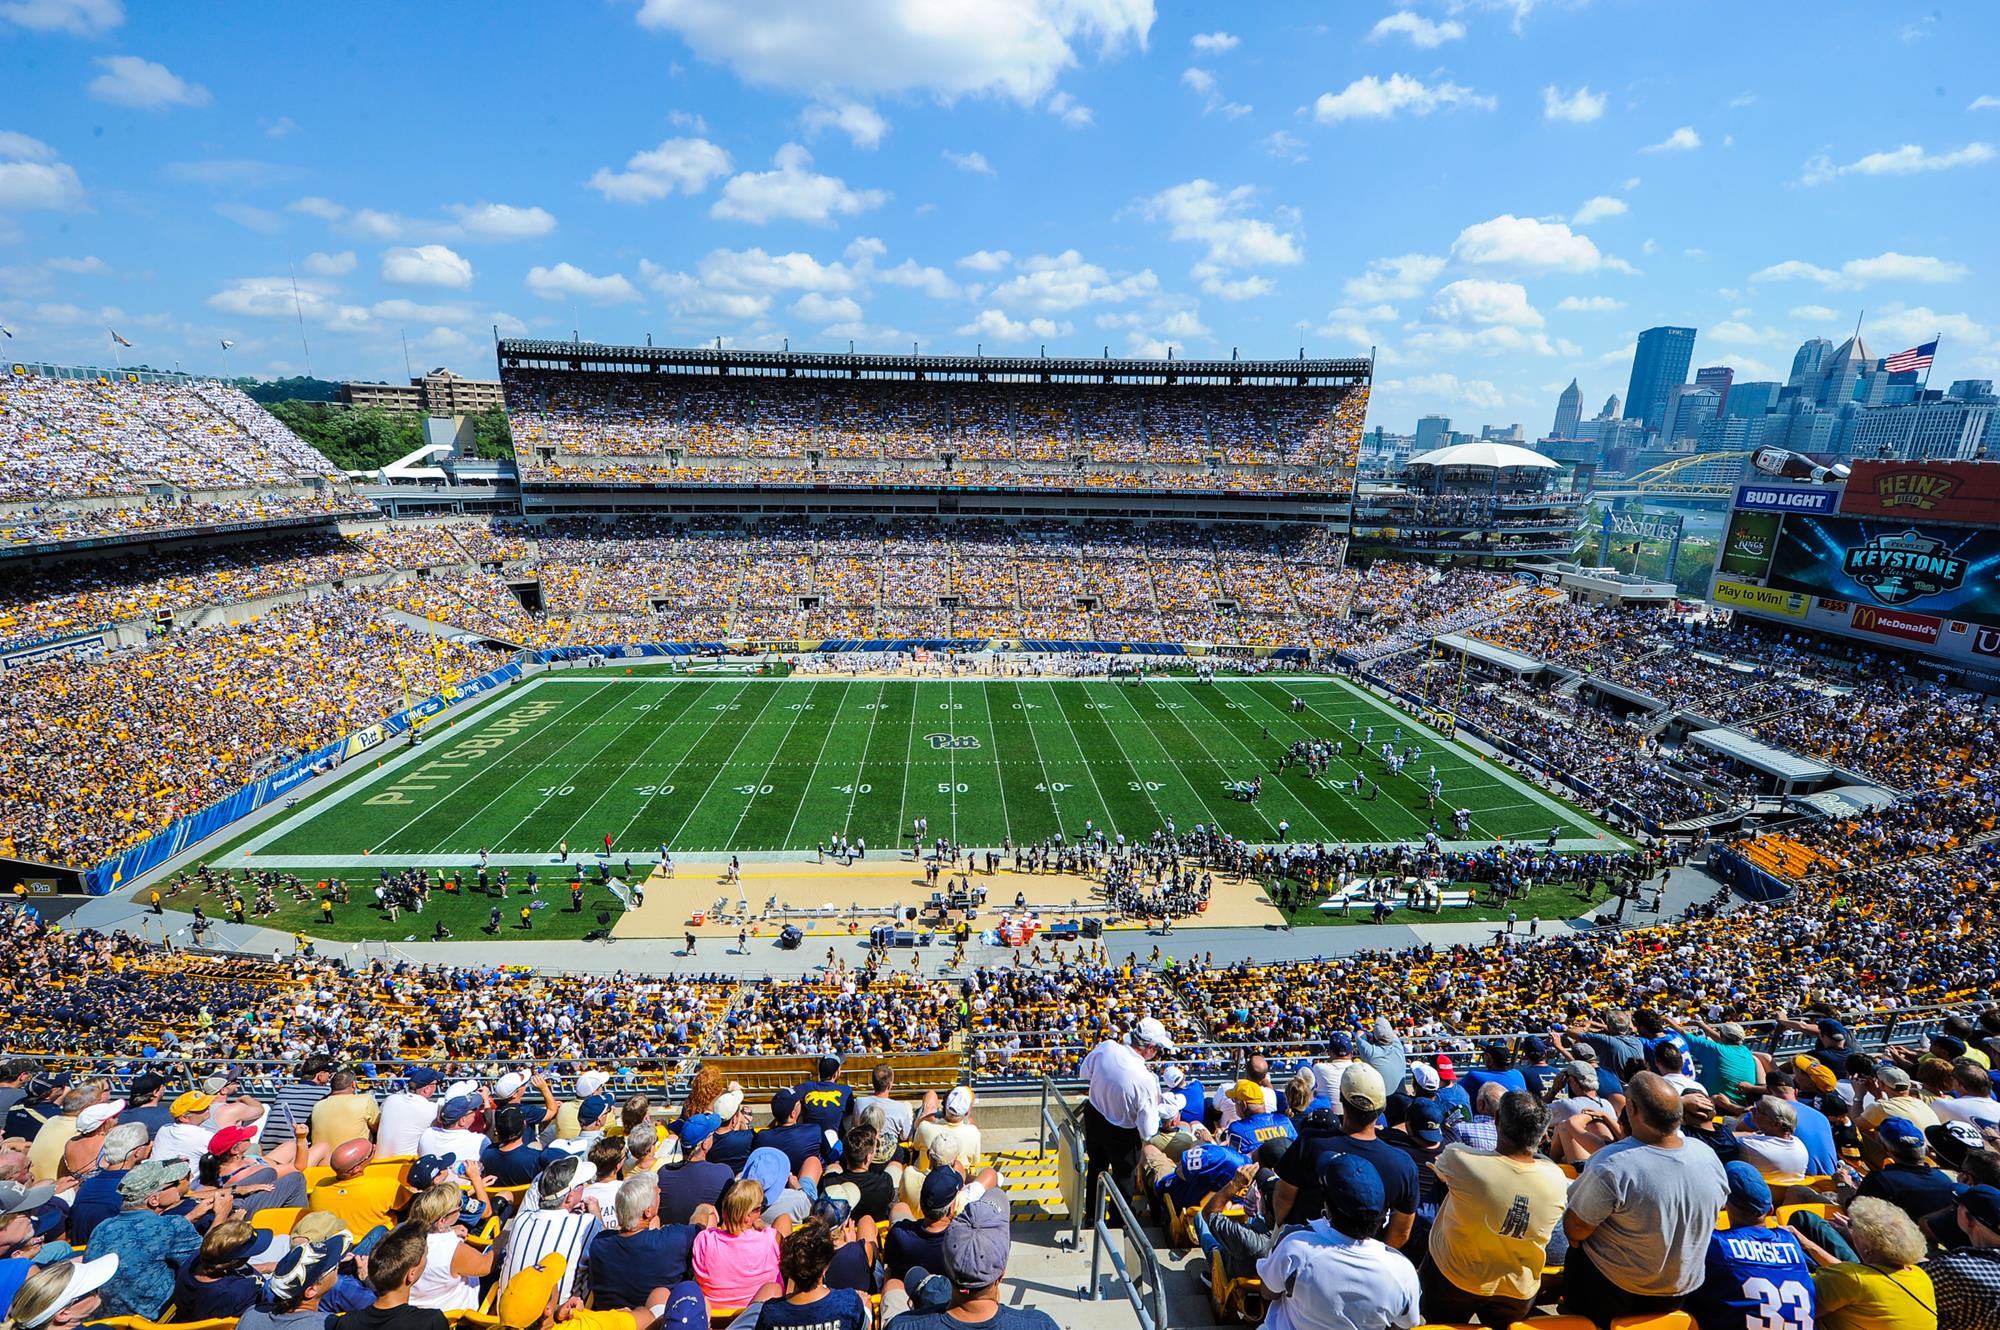 Traffic and Parking Details Announced for Pitt vs. Penn State Panthers #H2P